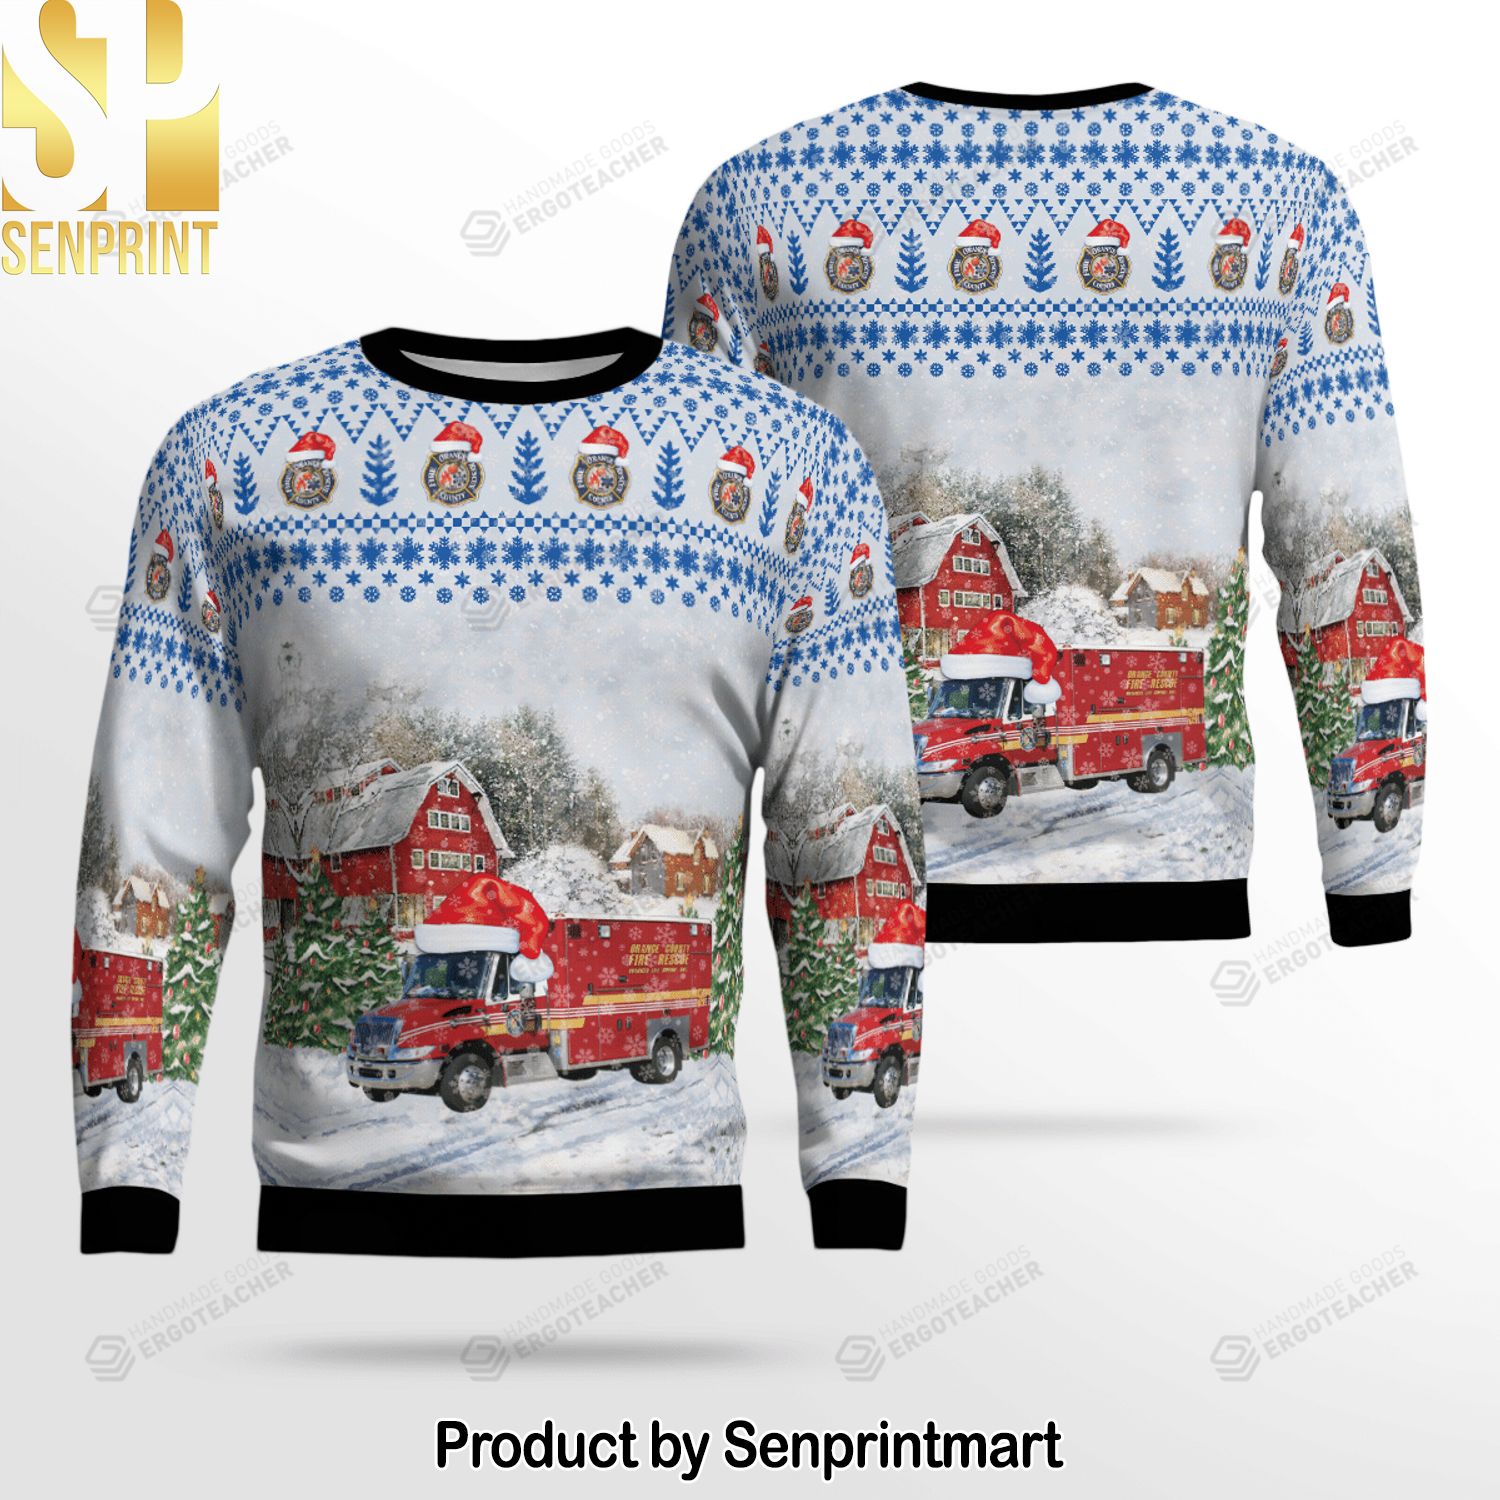 Florida Orange County Fire Rescue Paramedic For Christmas Gifts Ugly Christmas Wool Knitted Sweater